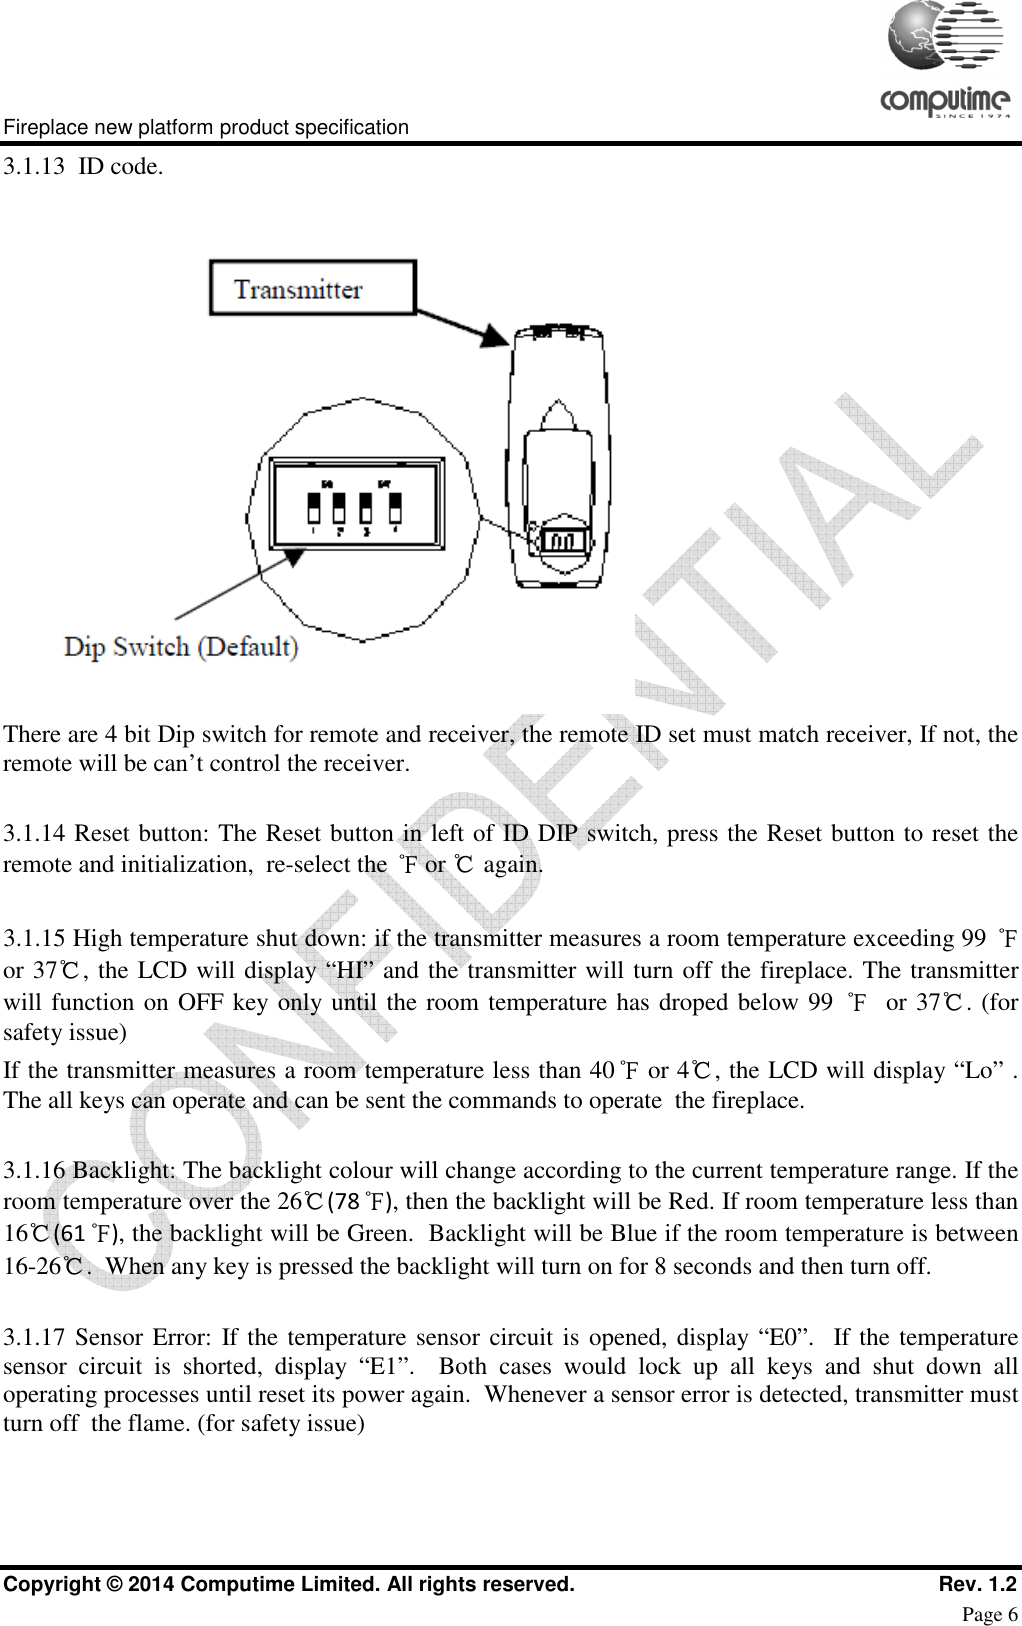     Fireplace new platform product specification Copyright © 2014 Computime Limited. All rights reserved.                                                    Rev. 1.2 Page 6 3.1.13  ID code.  There are 4 bit Dip switch for remote and receiver, the remote ID set must match receiver, If not, the remote will be can’t control the receiver.   3.1.14 Reset button: The Reset button in left of ID DIP switch, press the Reset button to reset the remote and initialization,  re-select the ℉ or ℃ again.  3.1.15 High temperature shut down: if the transmitter measures a room temperature exceeding 99 ℉ or 37℃, the LCD will display “HI” and the transmitter will turn off the fireplace. The transmitter will function on OFF key only until the room temperature has droped below 99 ℉  or 37℃. (for safety issue) If the transmitter measures a room temperature less than 40℉ or 4℃, the LCD will display “Lo” .  The all keys can operate and can be sent the commands to operate  the fireplace.  3.1.16 Backlight: The backlight colour will change according to the current temperature range. If the room temperature over the 26℃(78℉), then the backlight will be Red. If room temperature less than 16℃(61℉), the backlight will be Green.  Backlight will be Blue if the room temperature is between 16-26℃.  When any key is pressed the backlight will turn on for 8 seconds and then turn off.  3.1.17 Sensor Error: If the temperature sensor circuit is opened, display “E0”.   If the temperature sensor  circuit  is  shorted,  display  “E1”.    Both  cases  would  lock  up  all  keys  and  shut  down  all operating processes until reset its power again.  Whenever a sensor error is detected, transmitter must turn off  the flame. (for safety issue) 